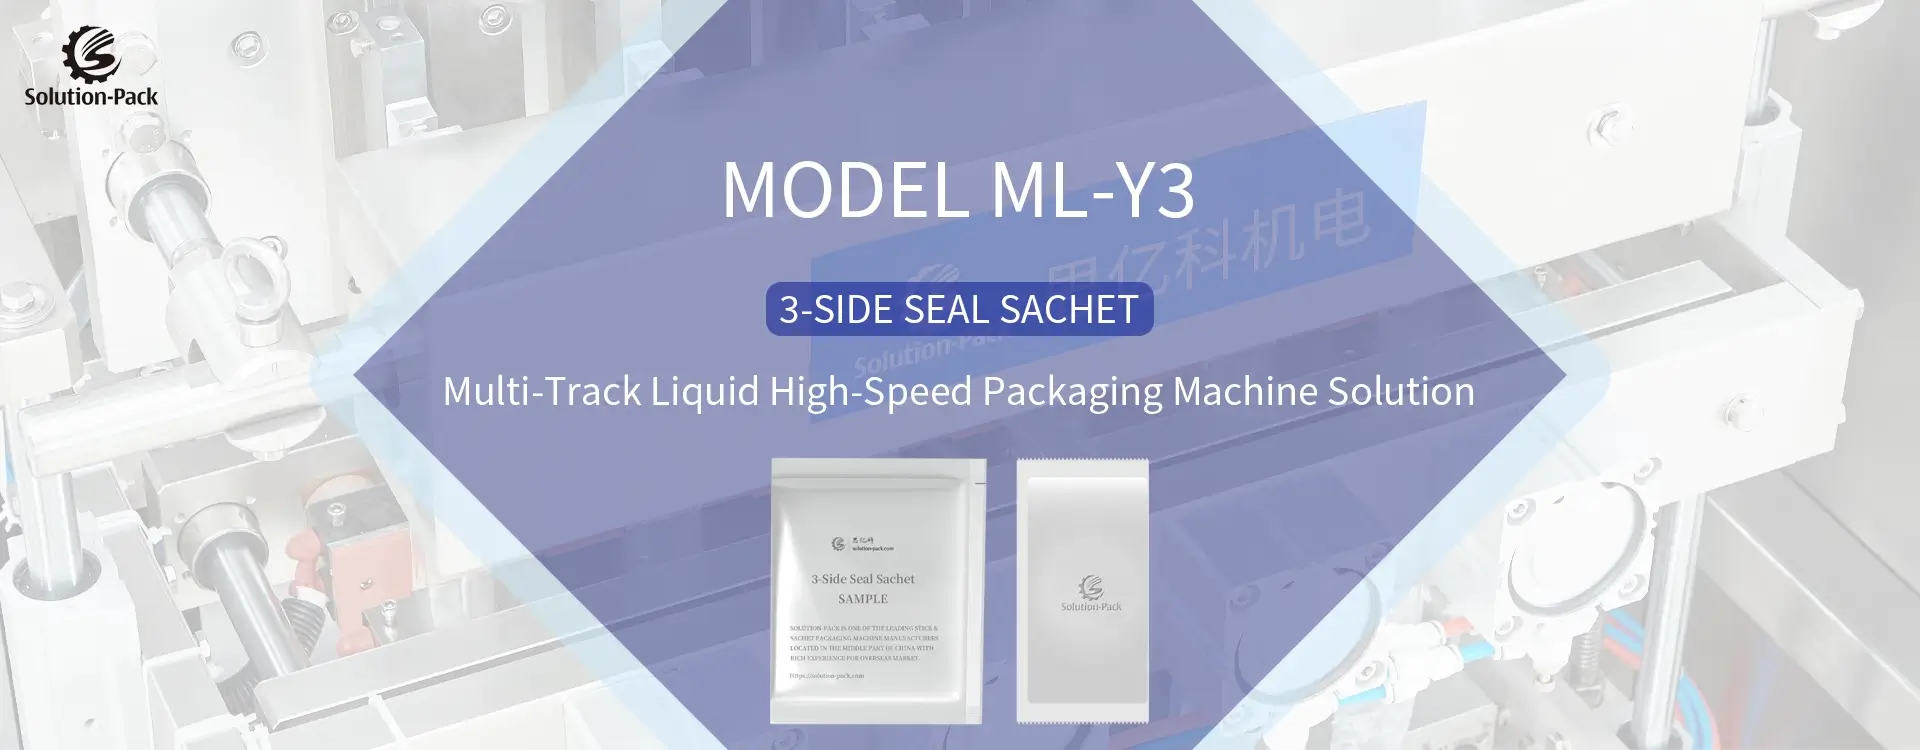 Model ML-Y3 Automatic High-Speed Multi-Track Liquid 3-Side Seal Sachet Packaging Machine Unit Heading Banner Picture | Solution-Pack